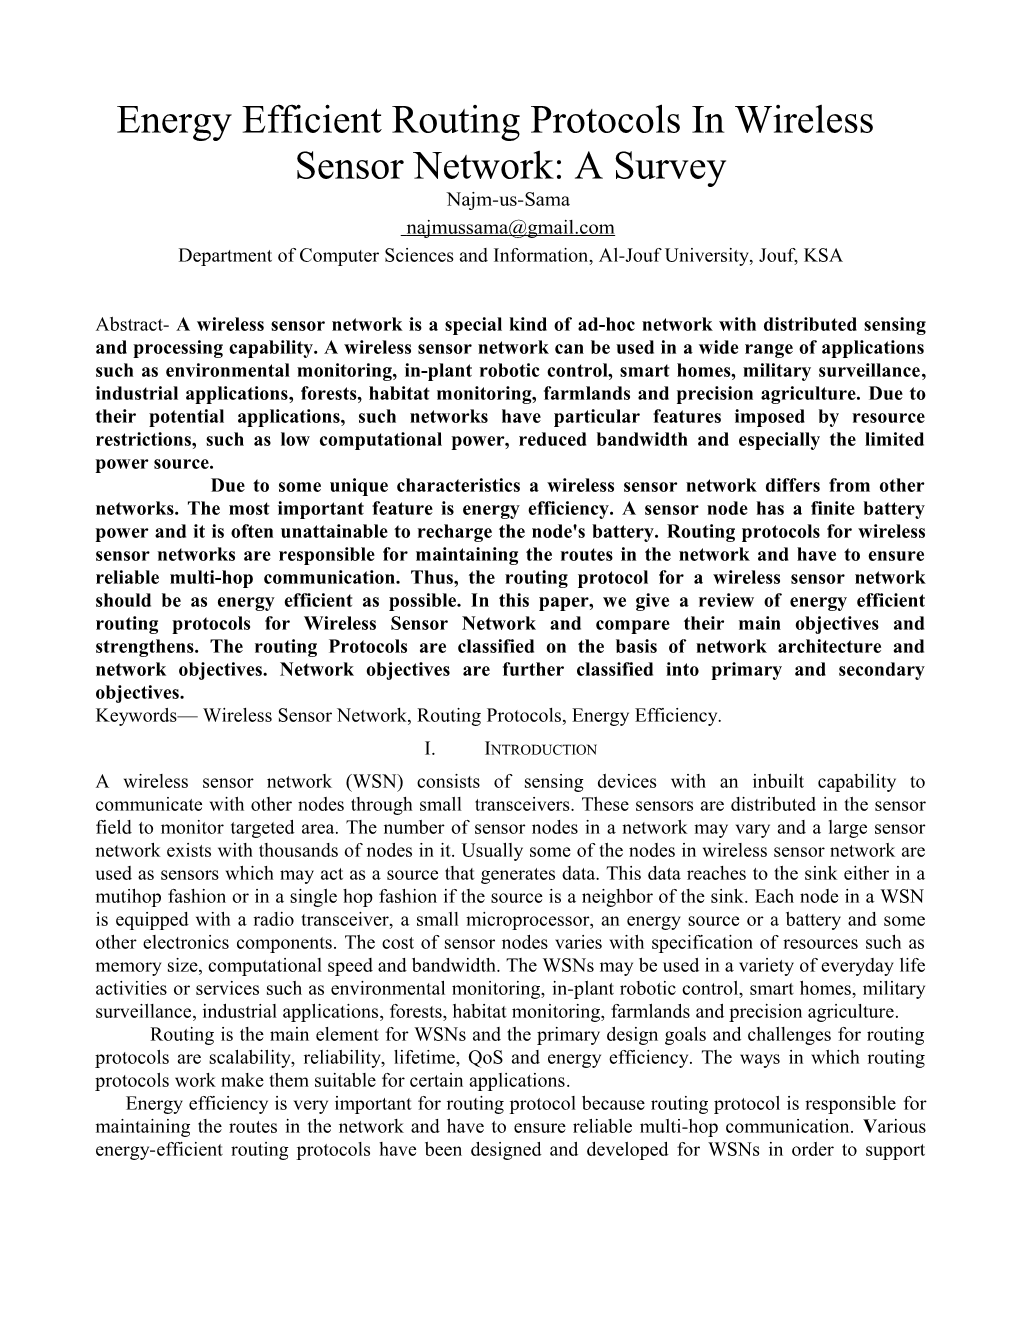 Energy Efficient Routing Protocols in Wireless Sensor Network: a Survey